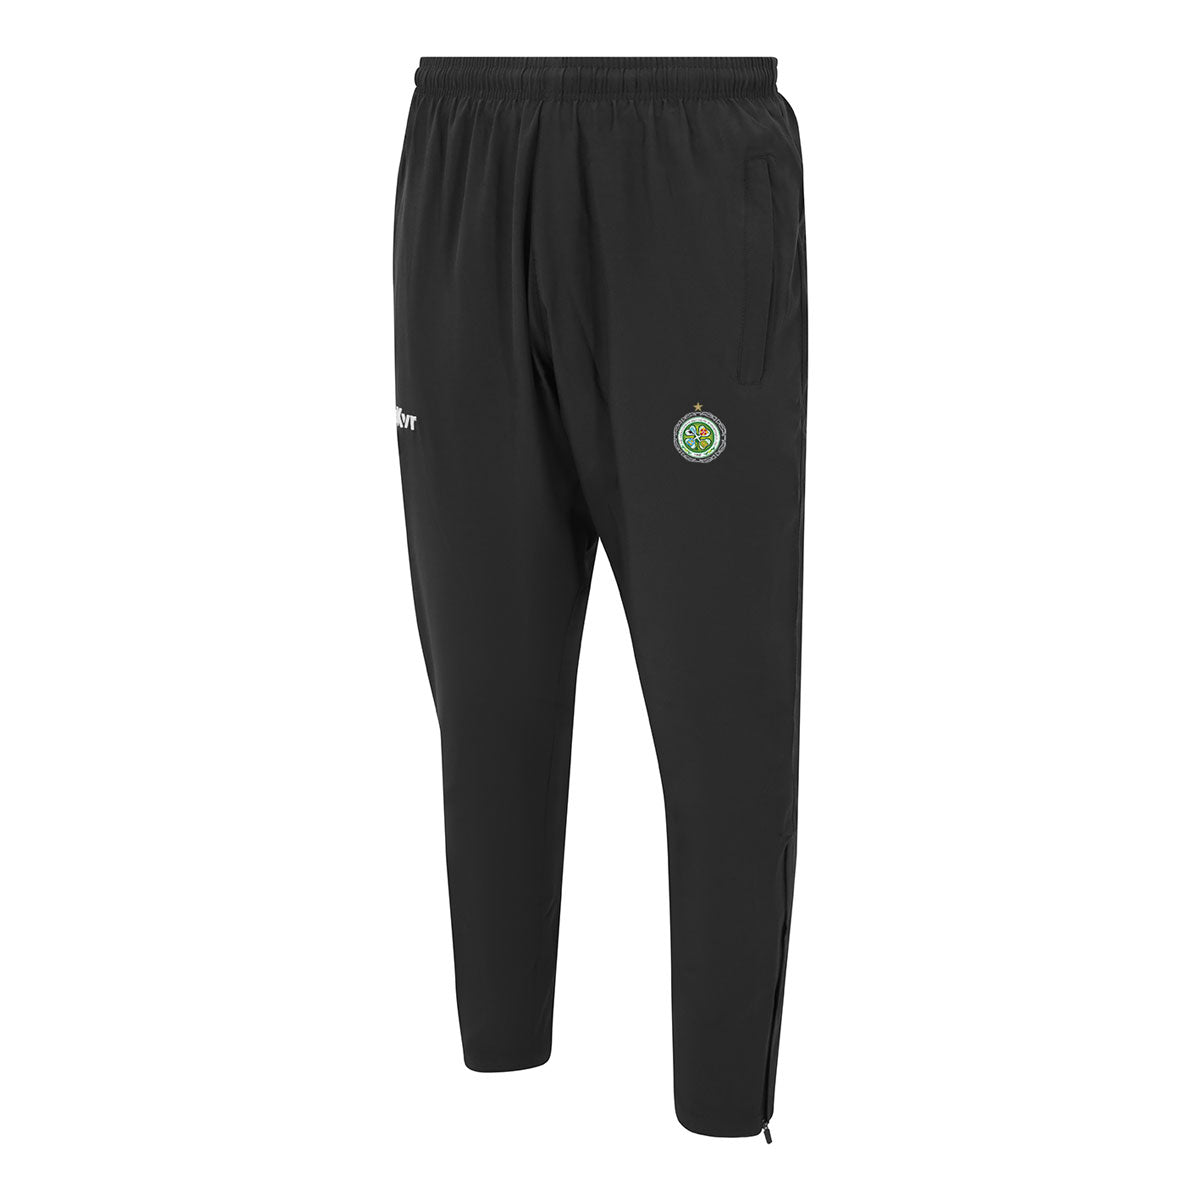 Mc Keever The Association of Irish Celtic Supporters Clubs Core 22 Tapered Pants - Adult - Black